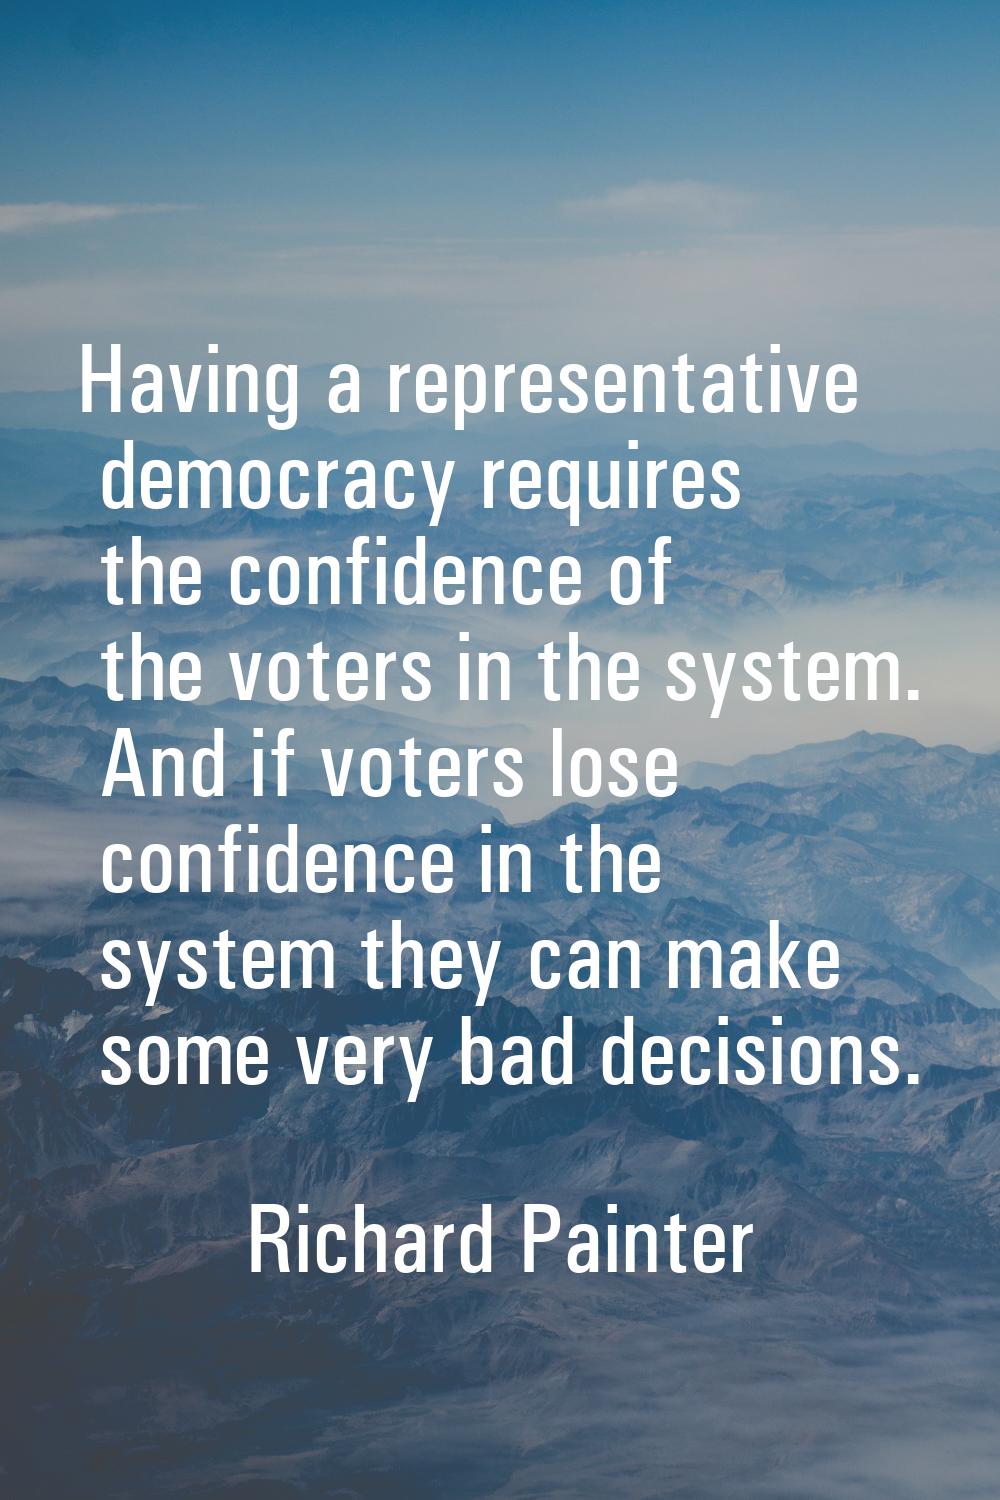 Having a representative democracy requires the confidence of the voters in the system. And if voter